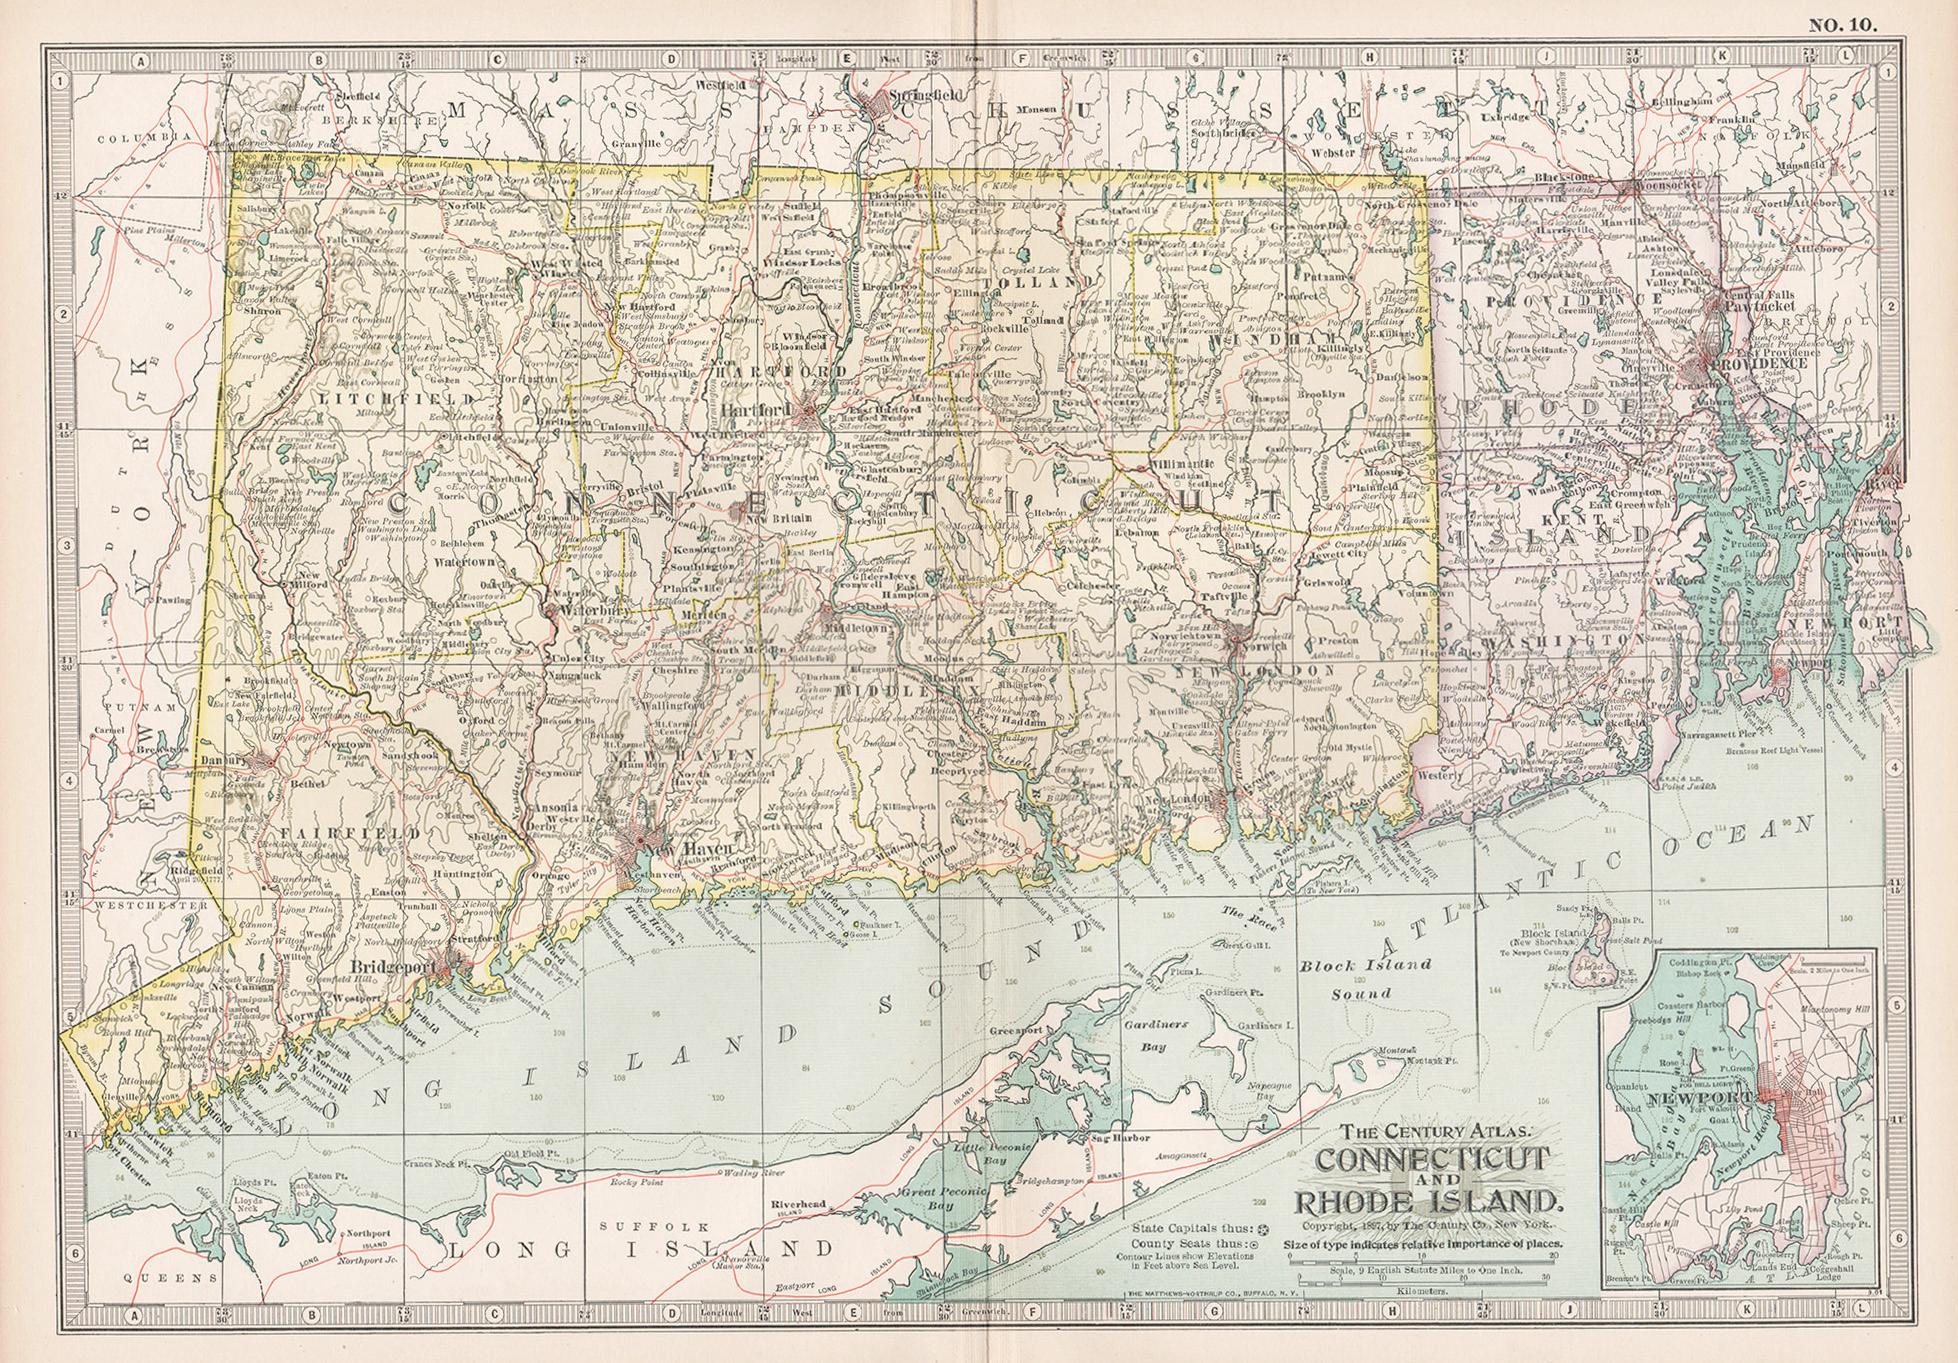 Unknown Print - Connecticut and Rhode Island. USA. Century Atlas state antique vintage map